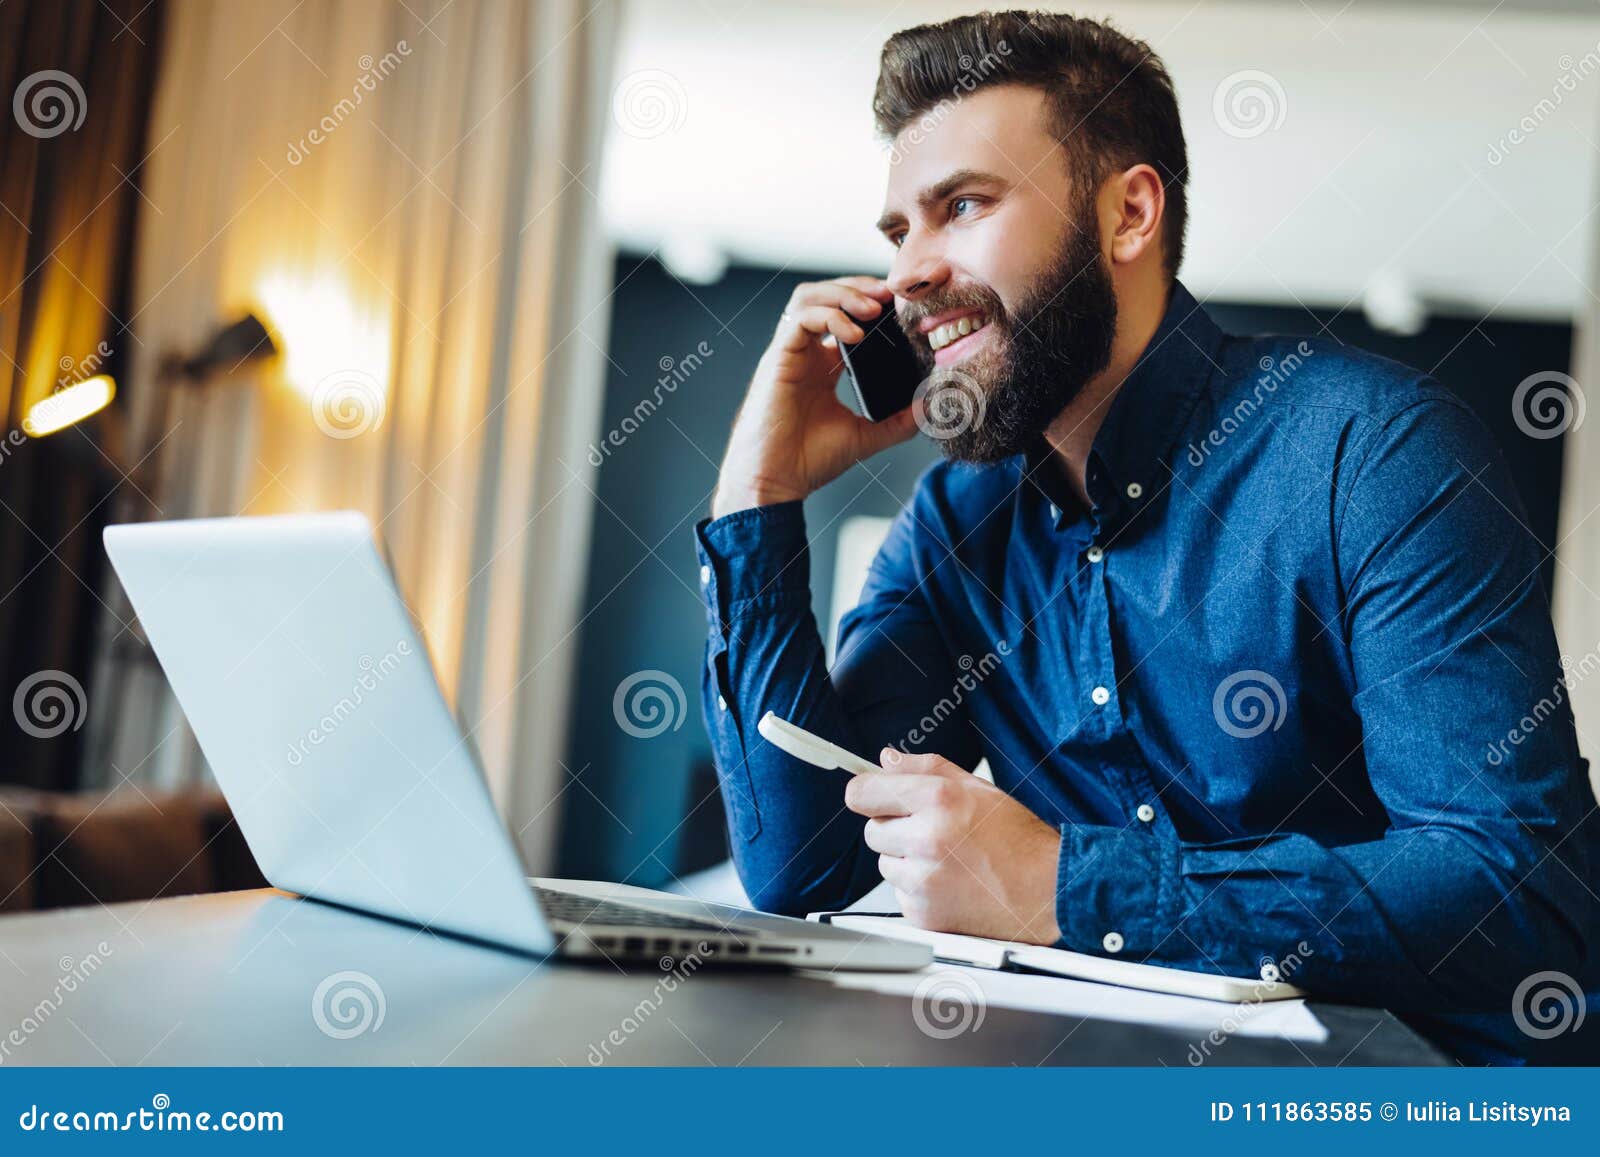 young smiling bearded businessman sitting in front of computer, talking on cell phone, holding pen. phone conversations.